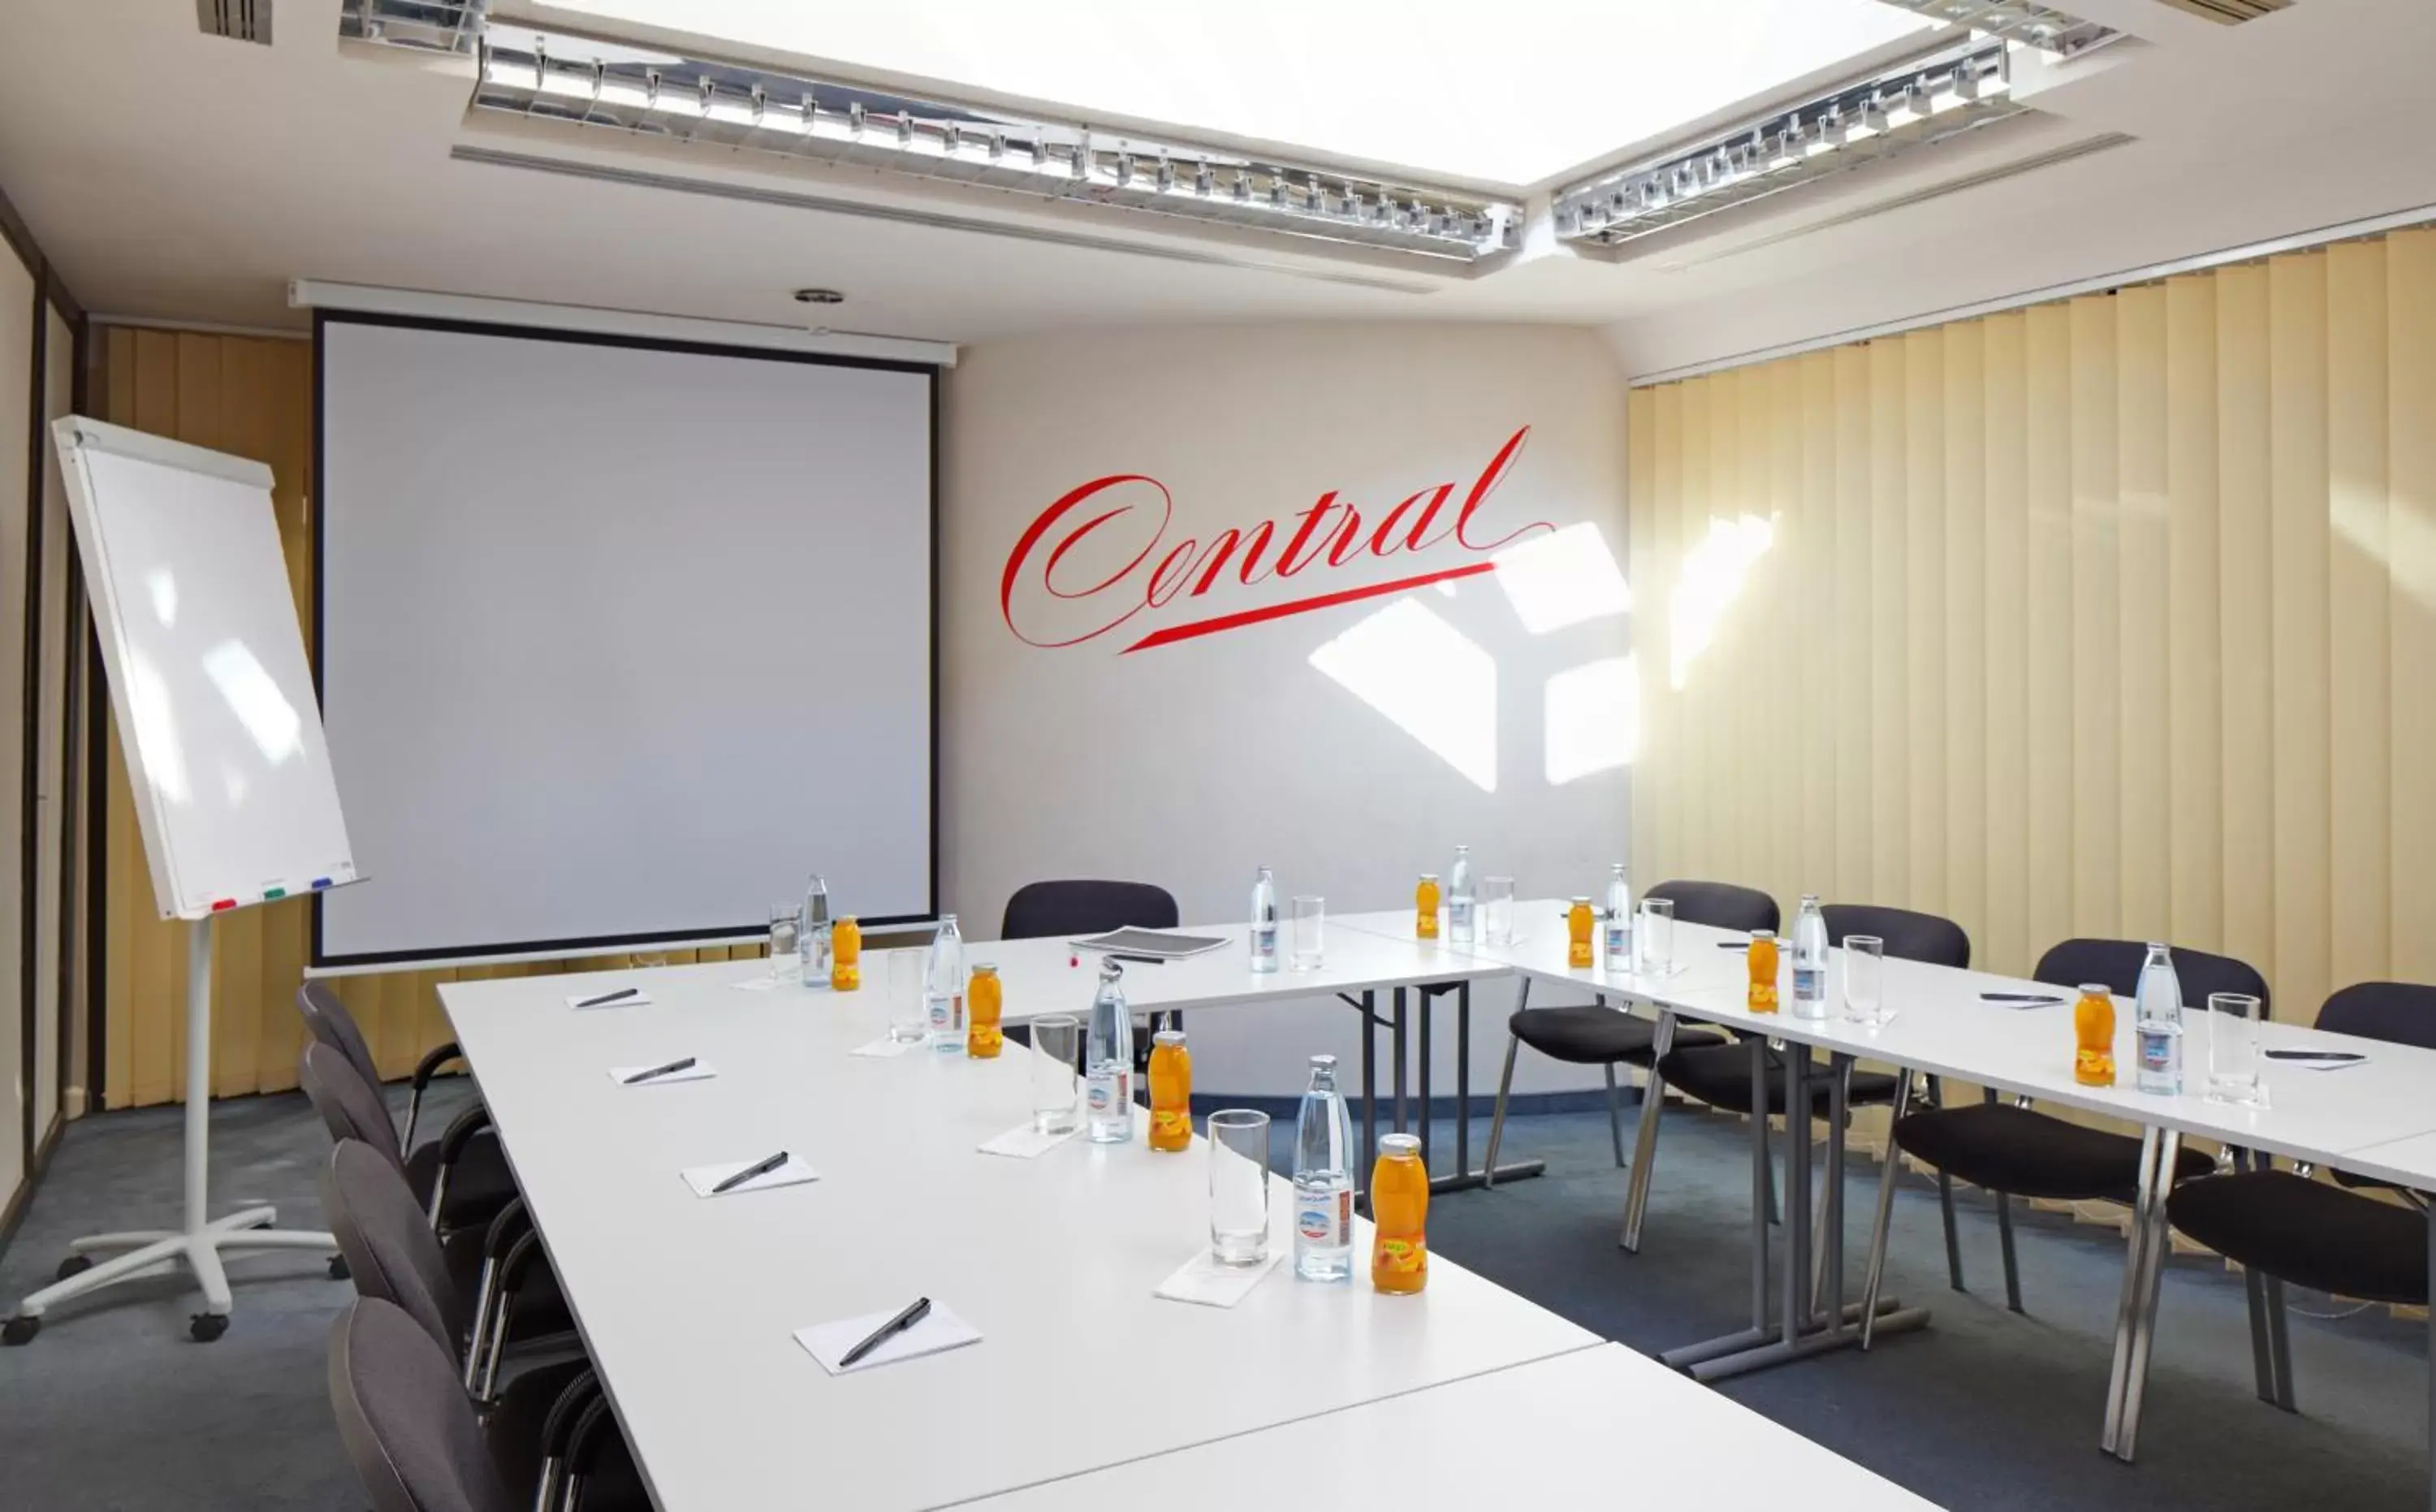 Business facilities in Hotel Central